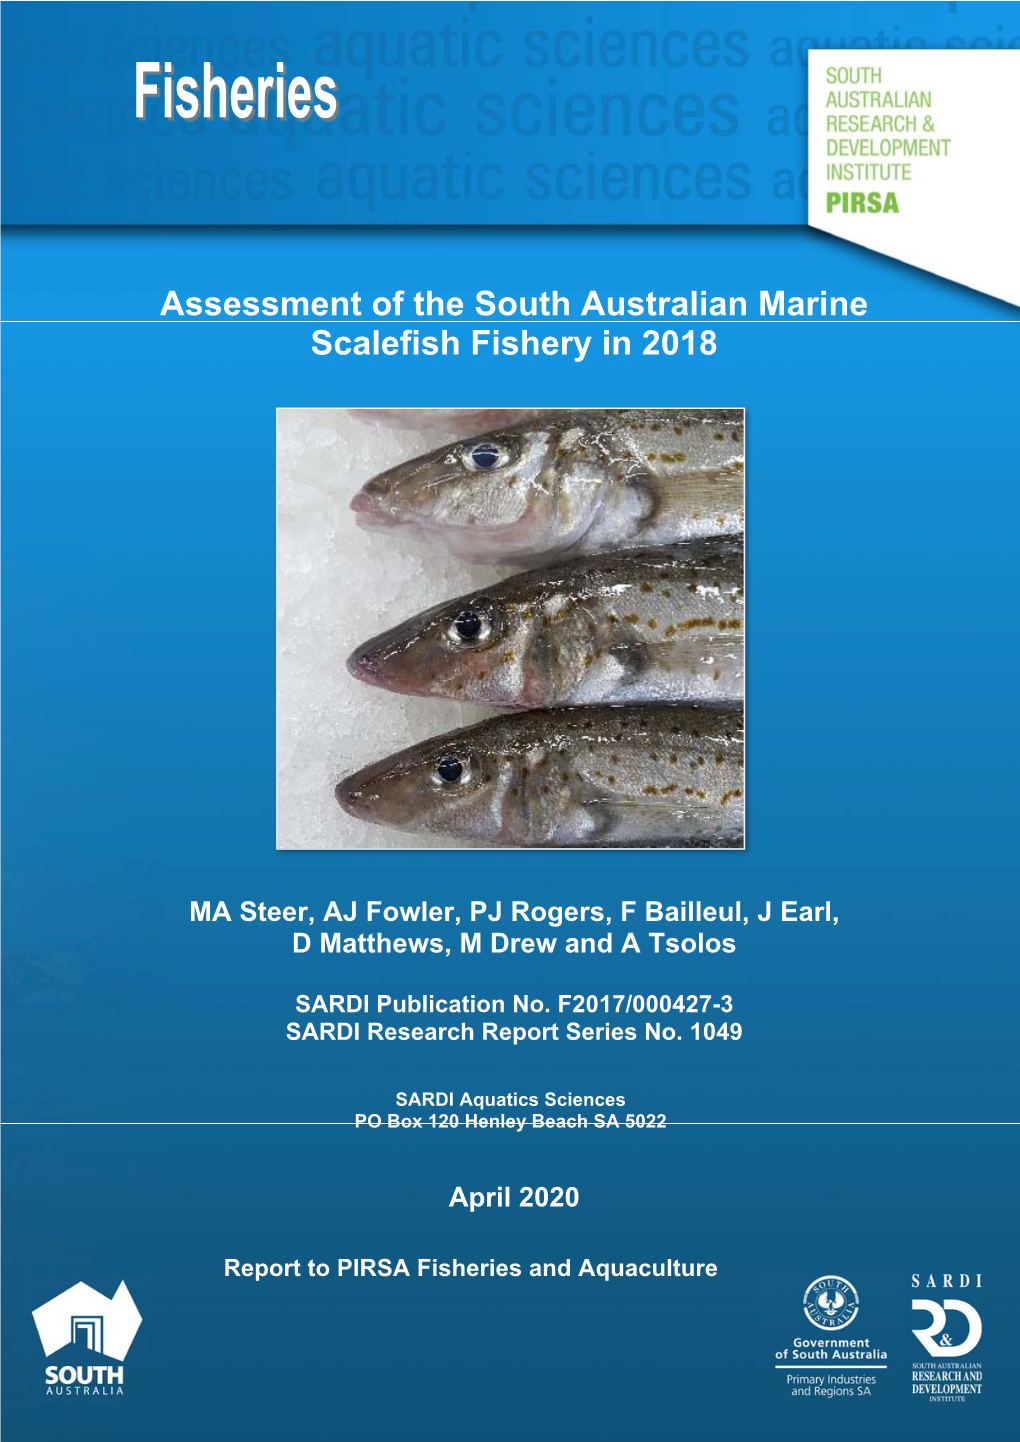 Assessment of the South Australian Marine Scalefish Fishery in 2018